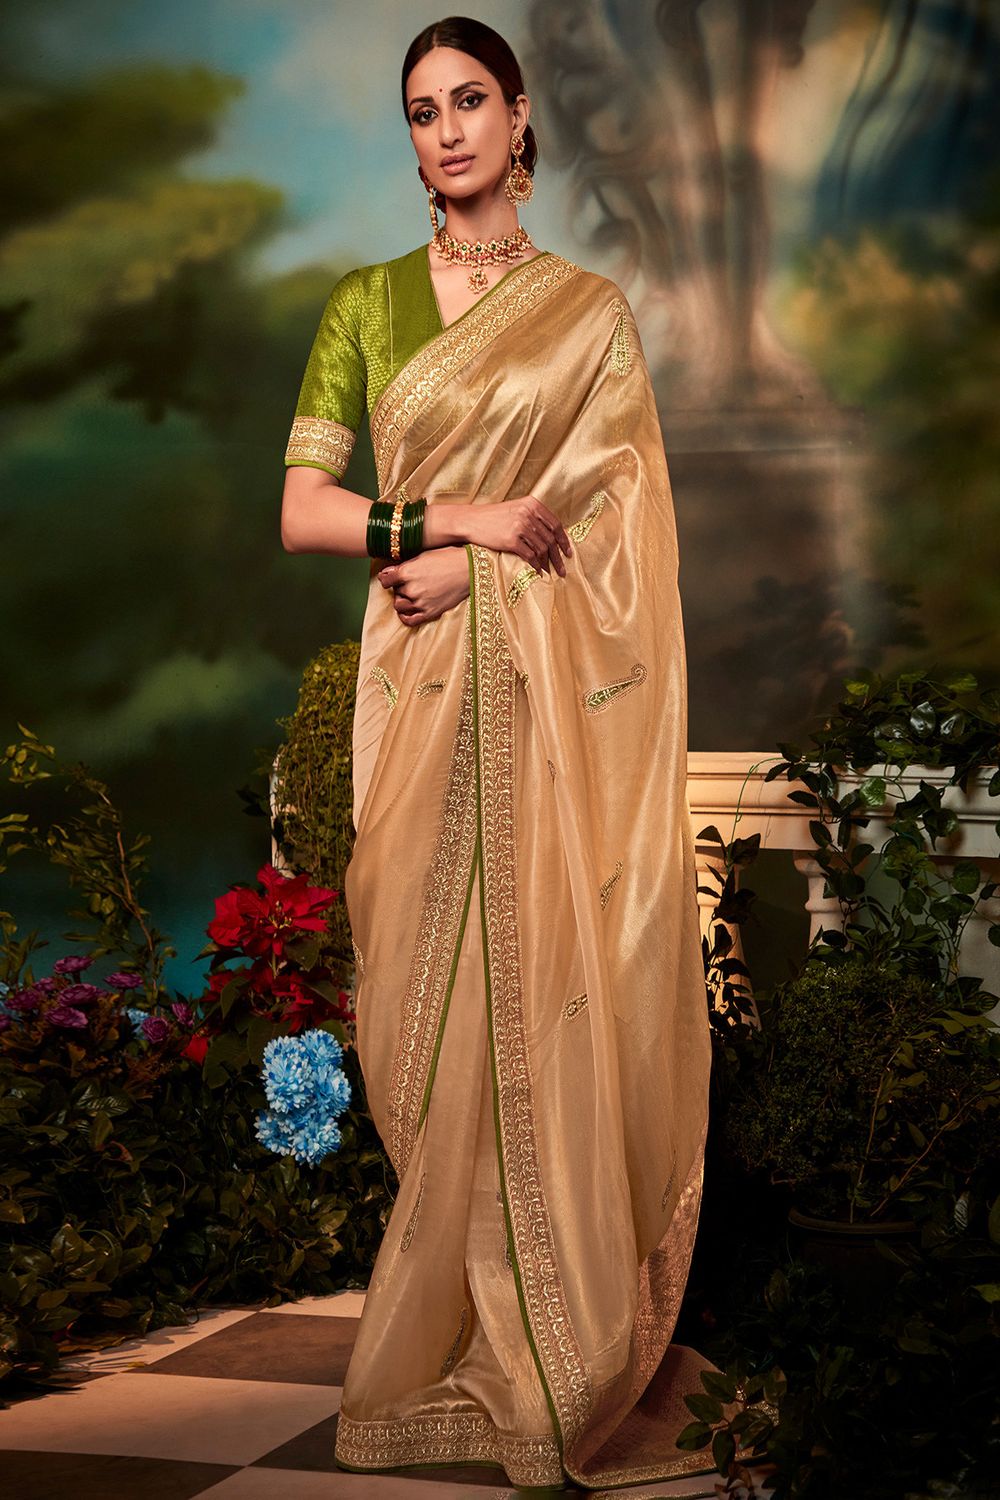 Tremendous Different Ways In Which You Can Wear A Gold Saree! |  Fashionworldhub